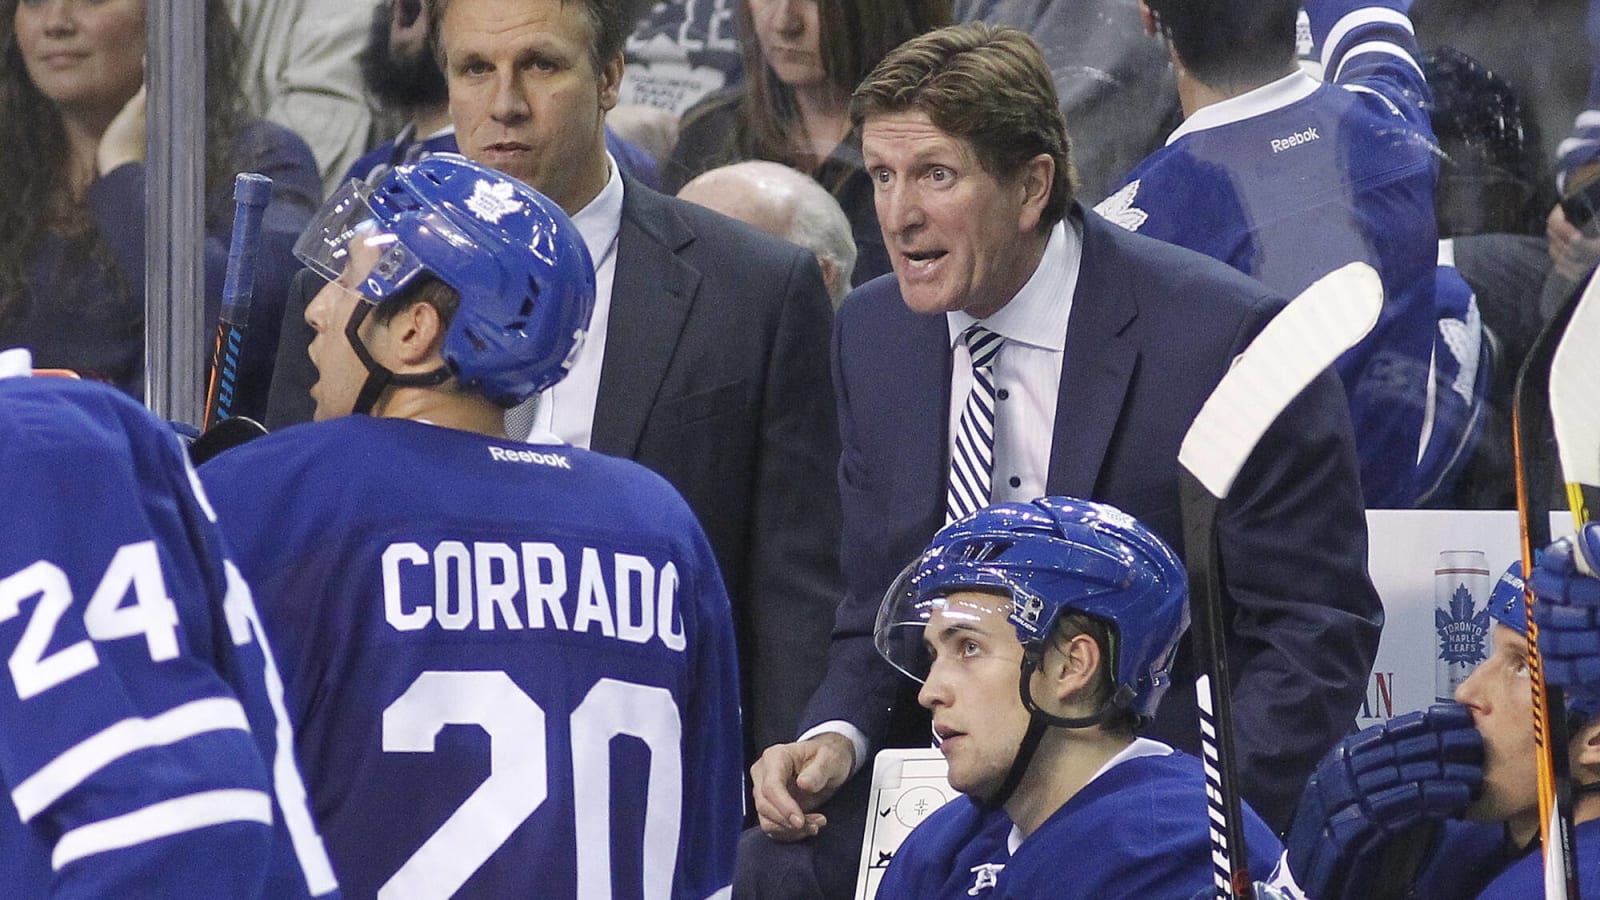 ‘All he cares about is himself’: Former Toronto Maple Leafs defenceman Frank Corrado speaks on Mike Babcock privacy allegations